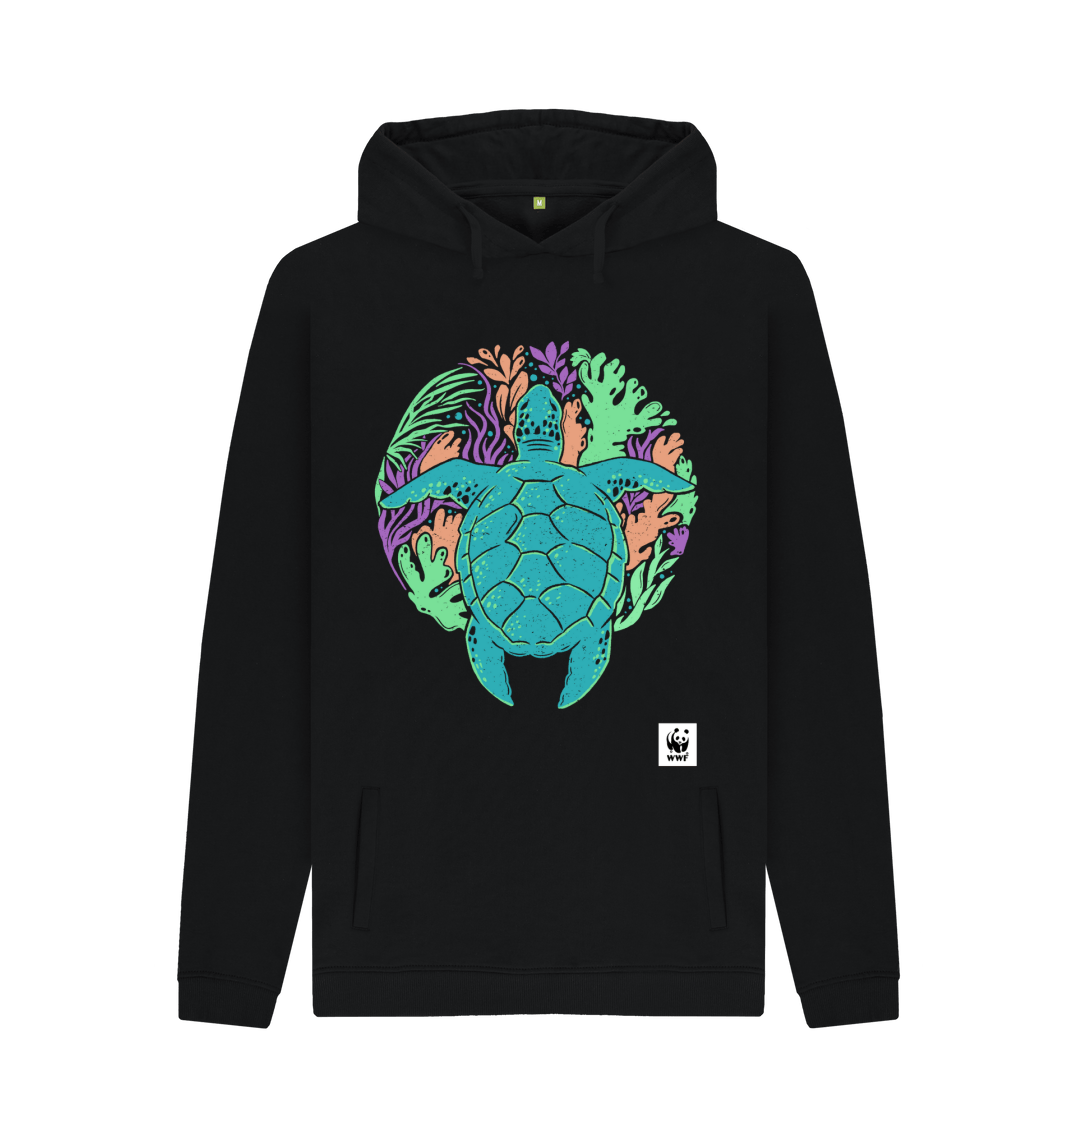 Organic hoodie for women and men with panda bear and tree